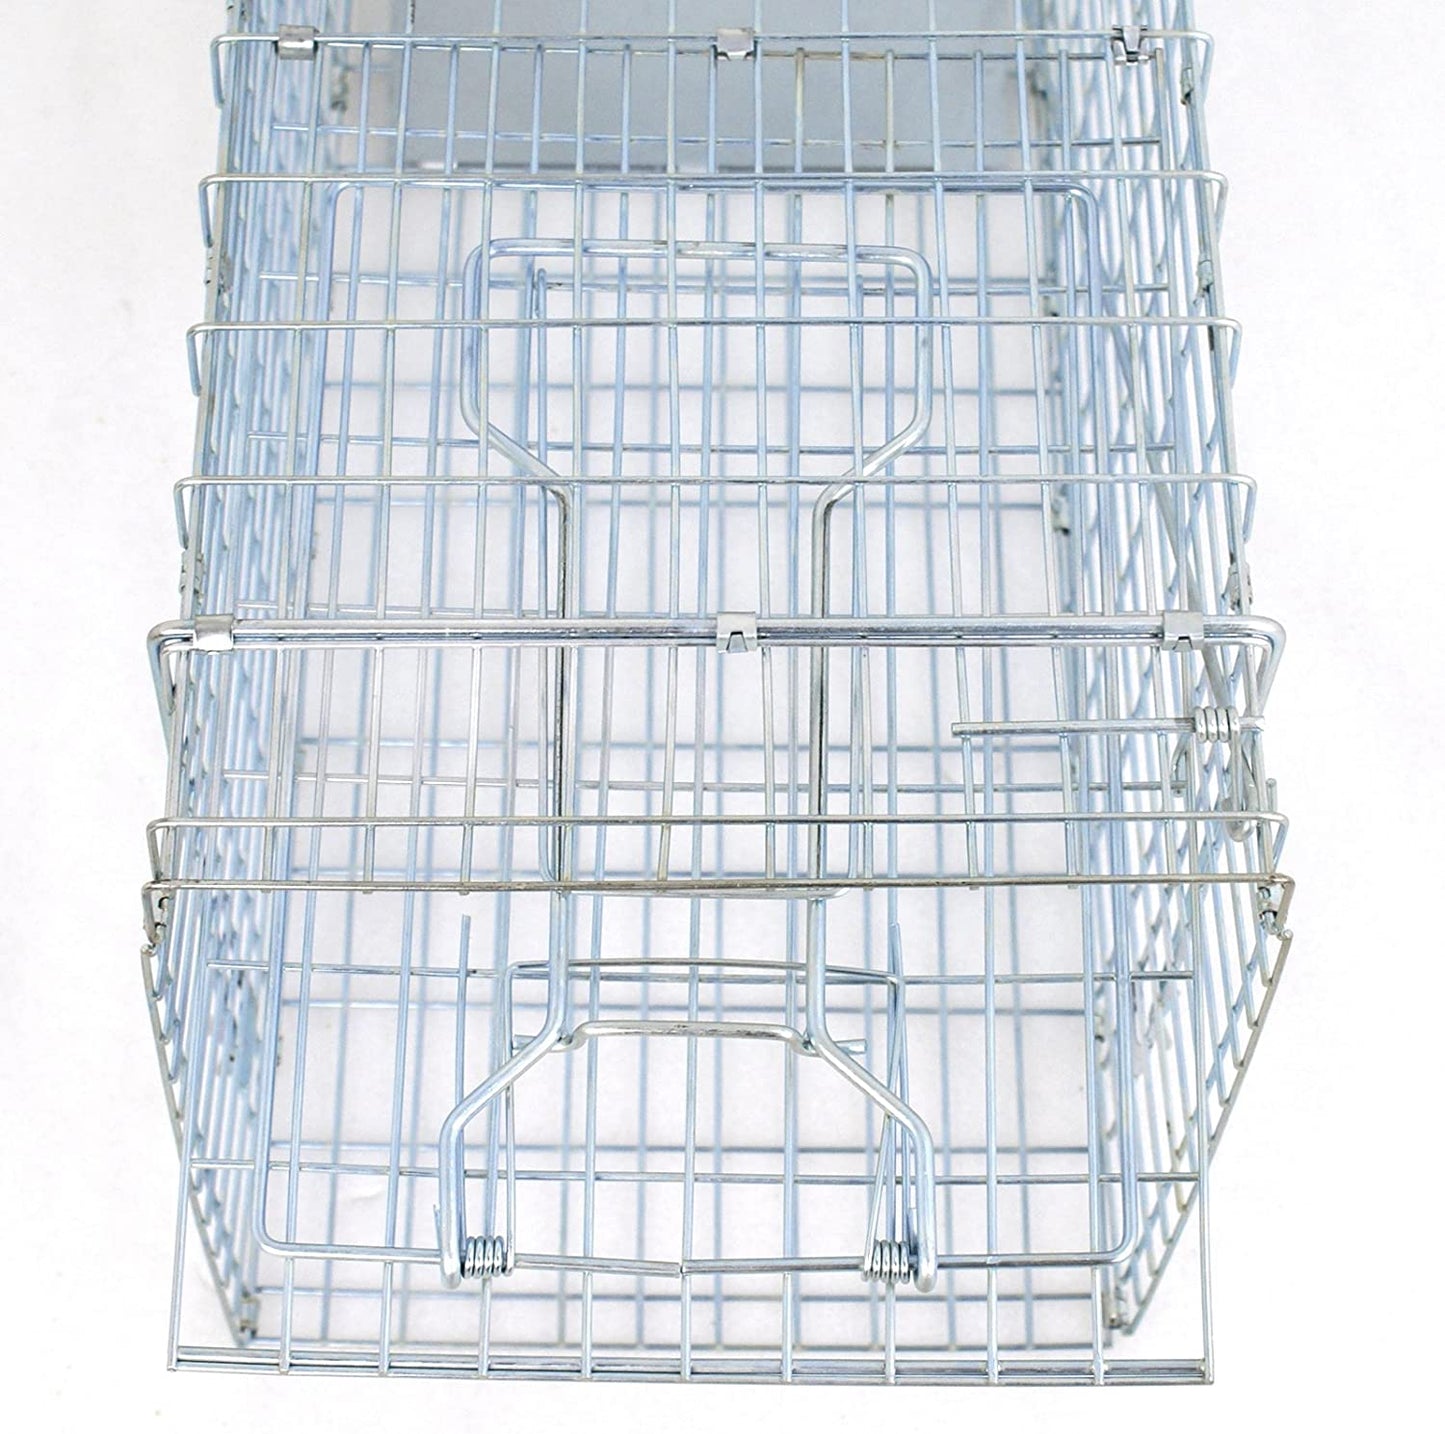 Live Animal Cage Trap 32" X 12.5" X 12" Steel Cage Catch Release Humane Rodent Cage for Rabbits, Stray Cat, Squirrel, Raccoon, Mole,Opossum, Skunk & Chipmunks (32" X 12.5" X 12")